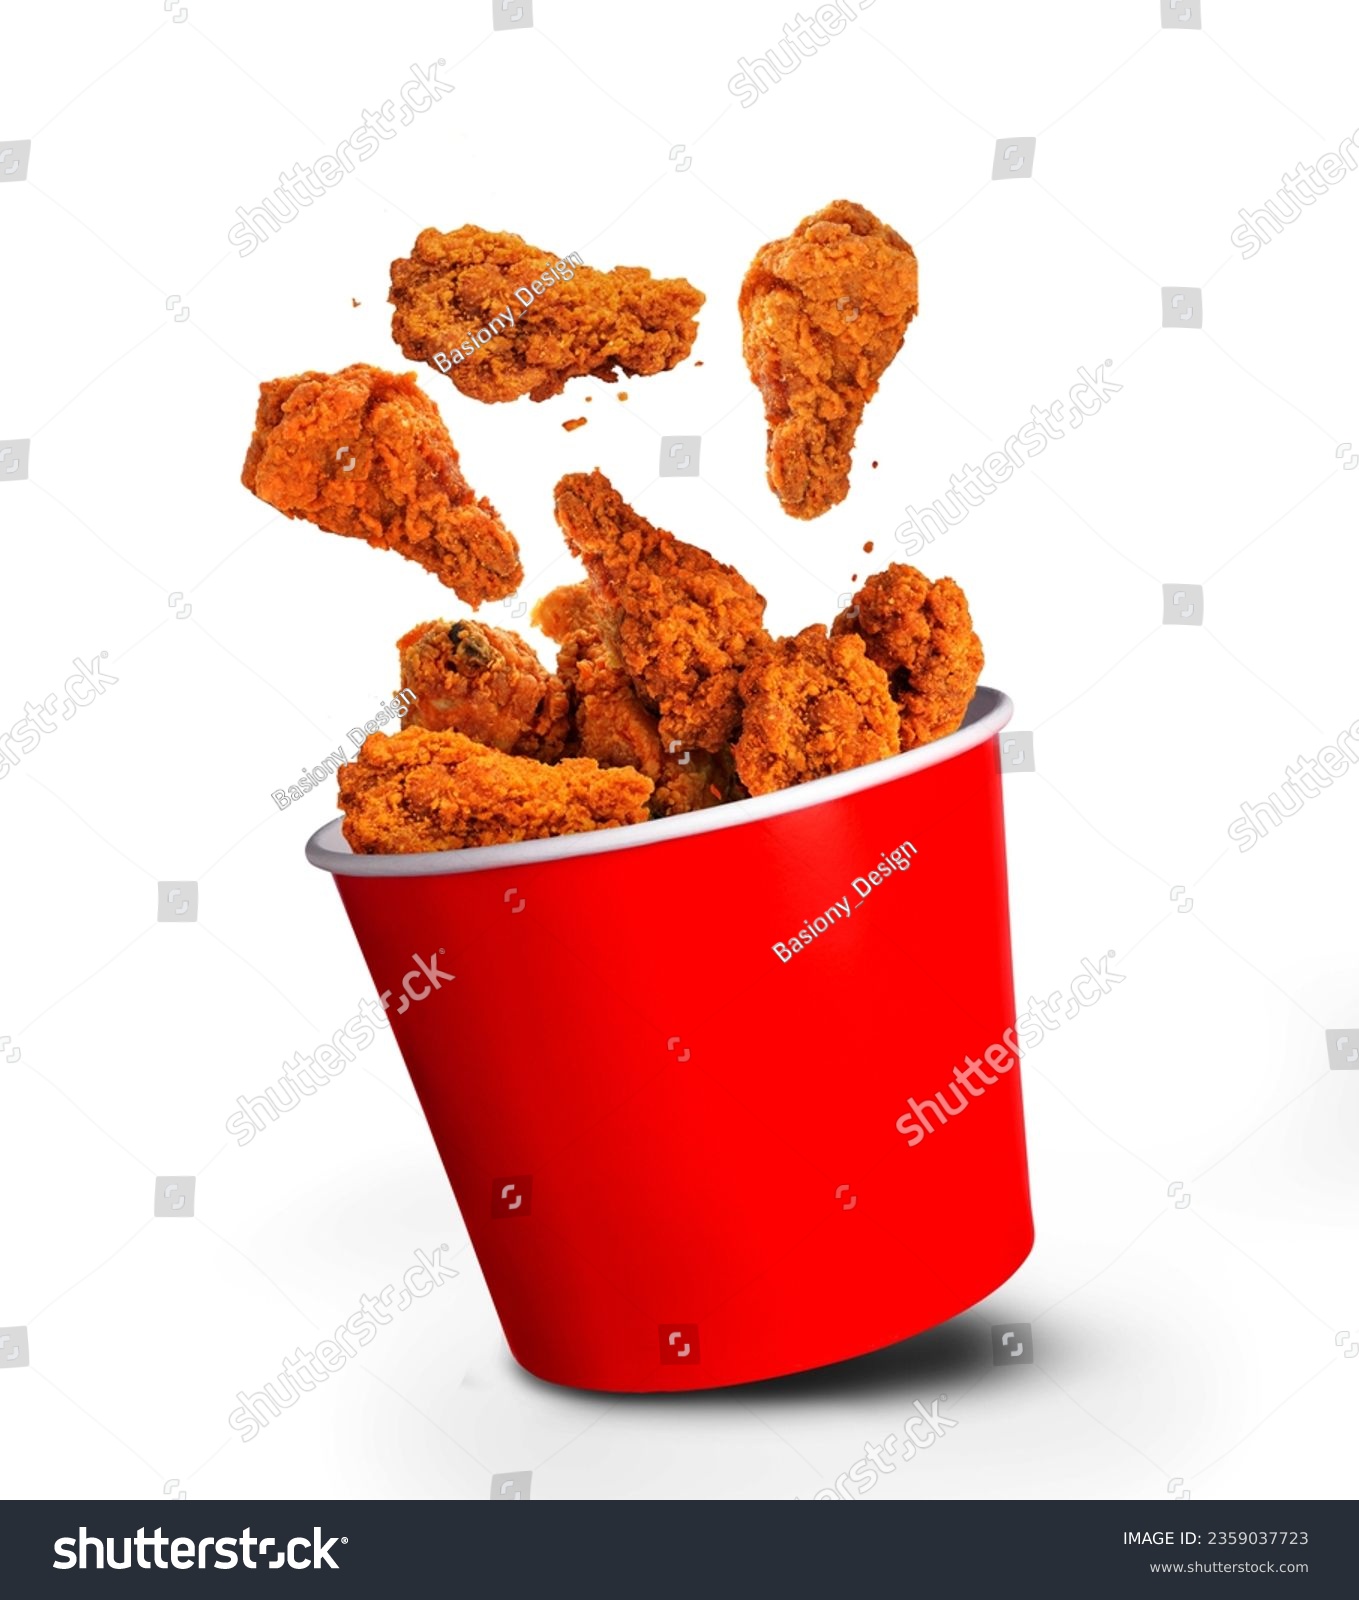 Hot Wings -Fried Chicken wings pieces fall into Bucket - large box isolated on white background	 #2359037723